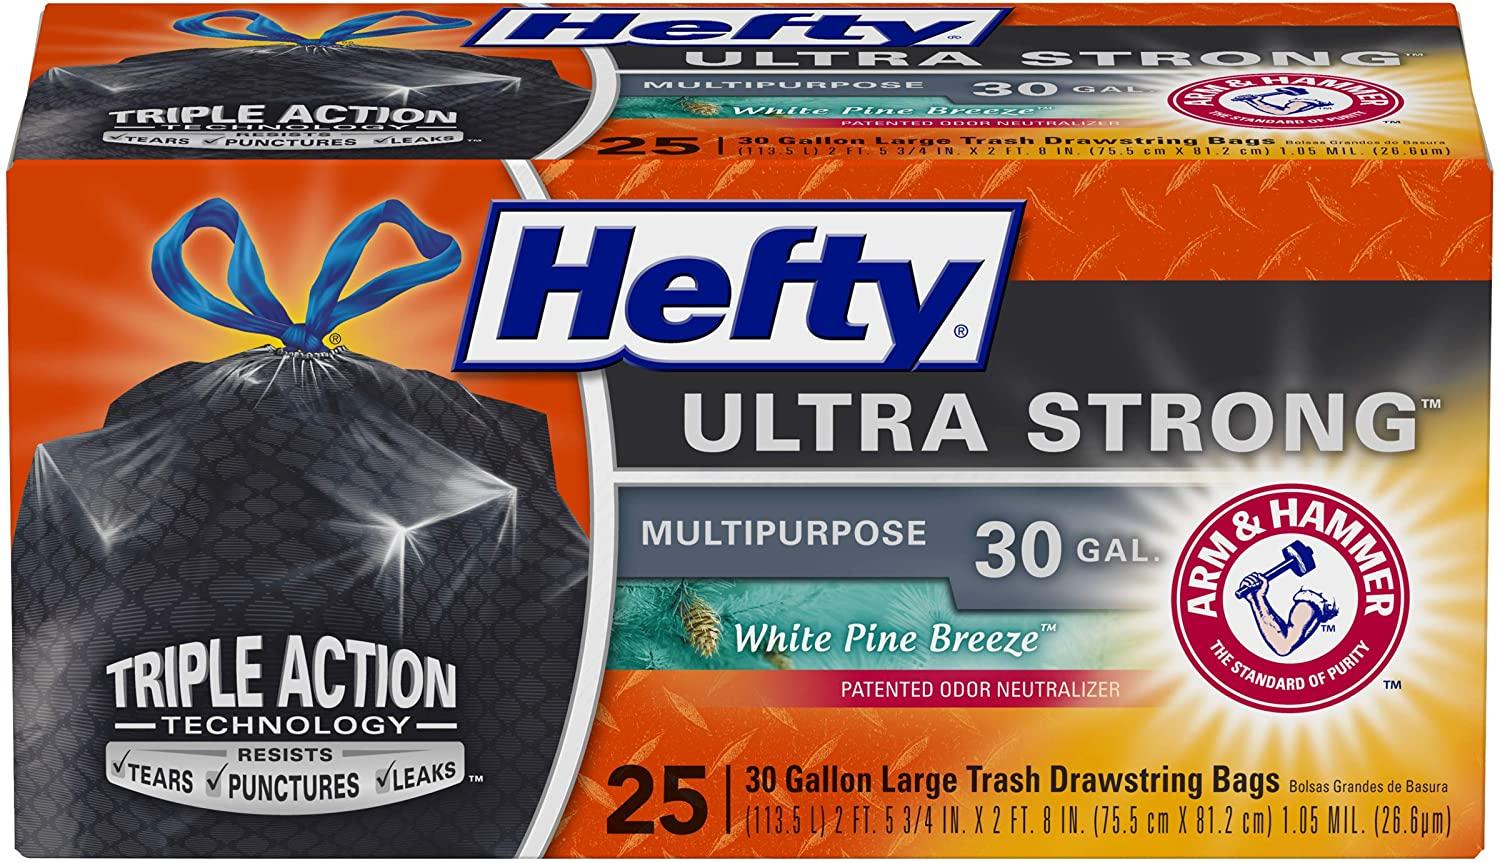 25 Hefty Ultra Strong 30-Gallon Trash Bags for $6.64 Shipped